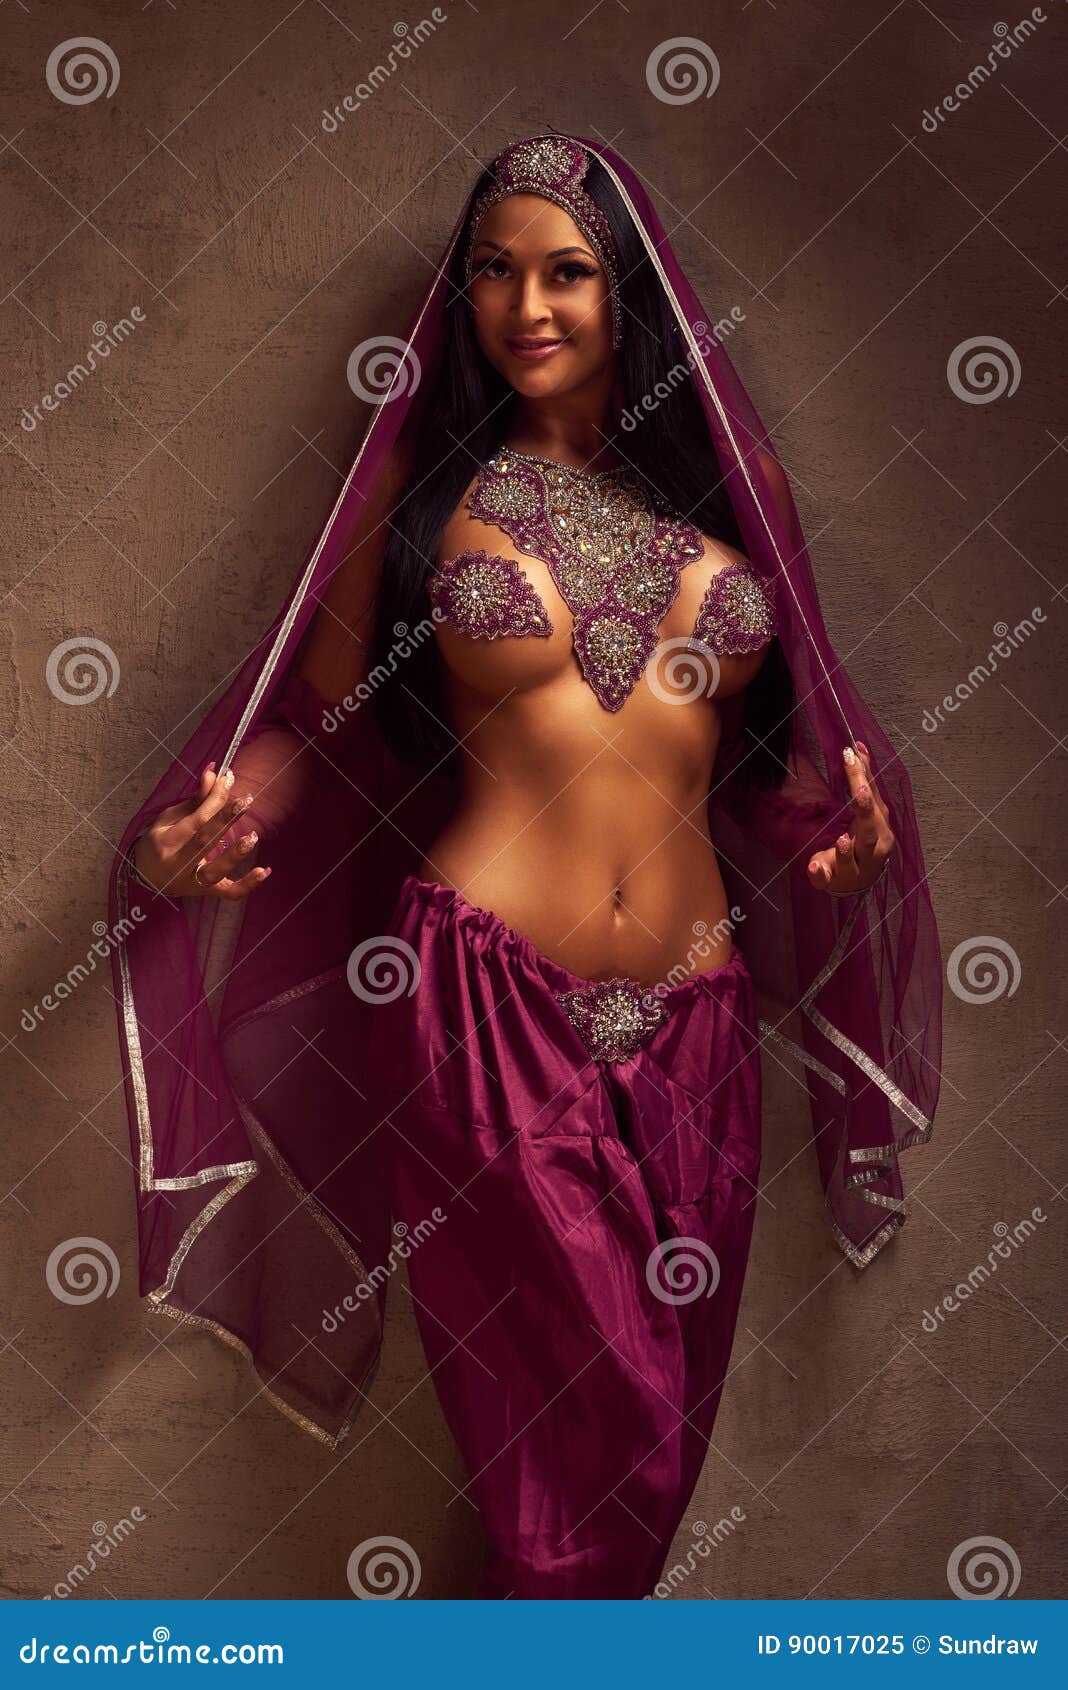 belly-dancer woman in afghani pants, purdah and adornment